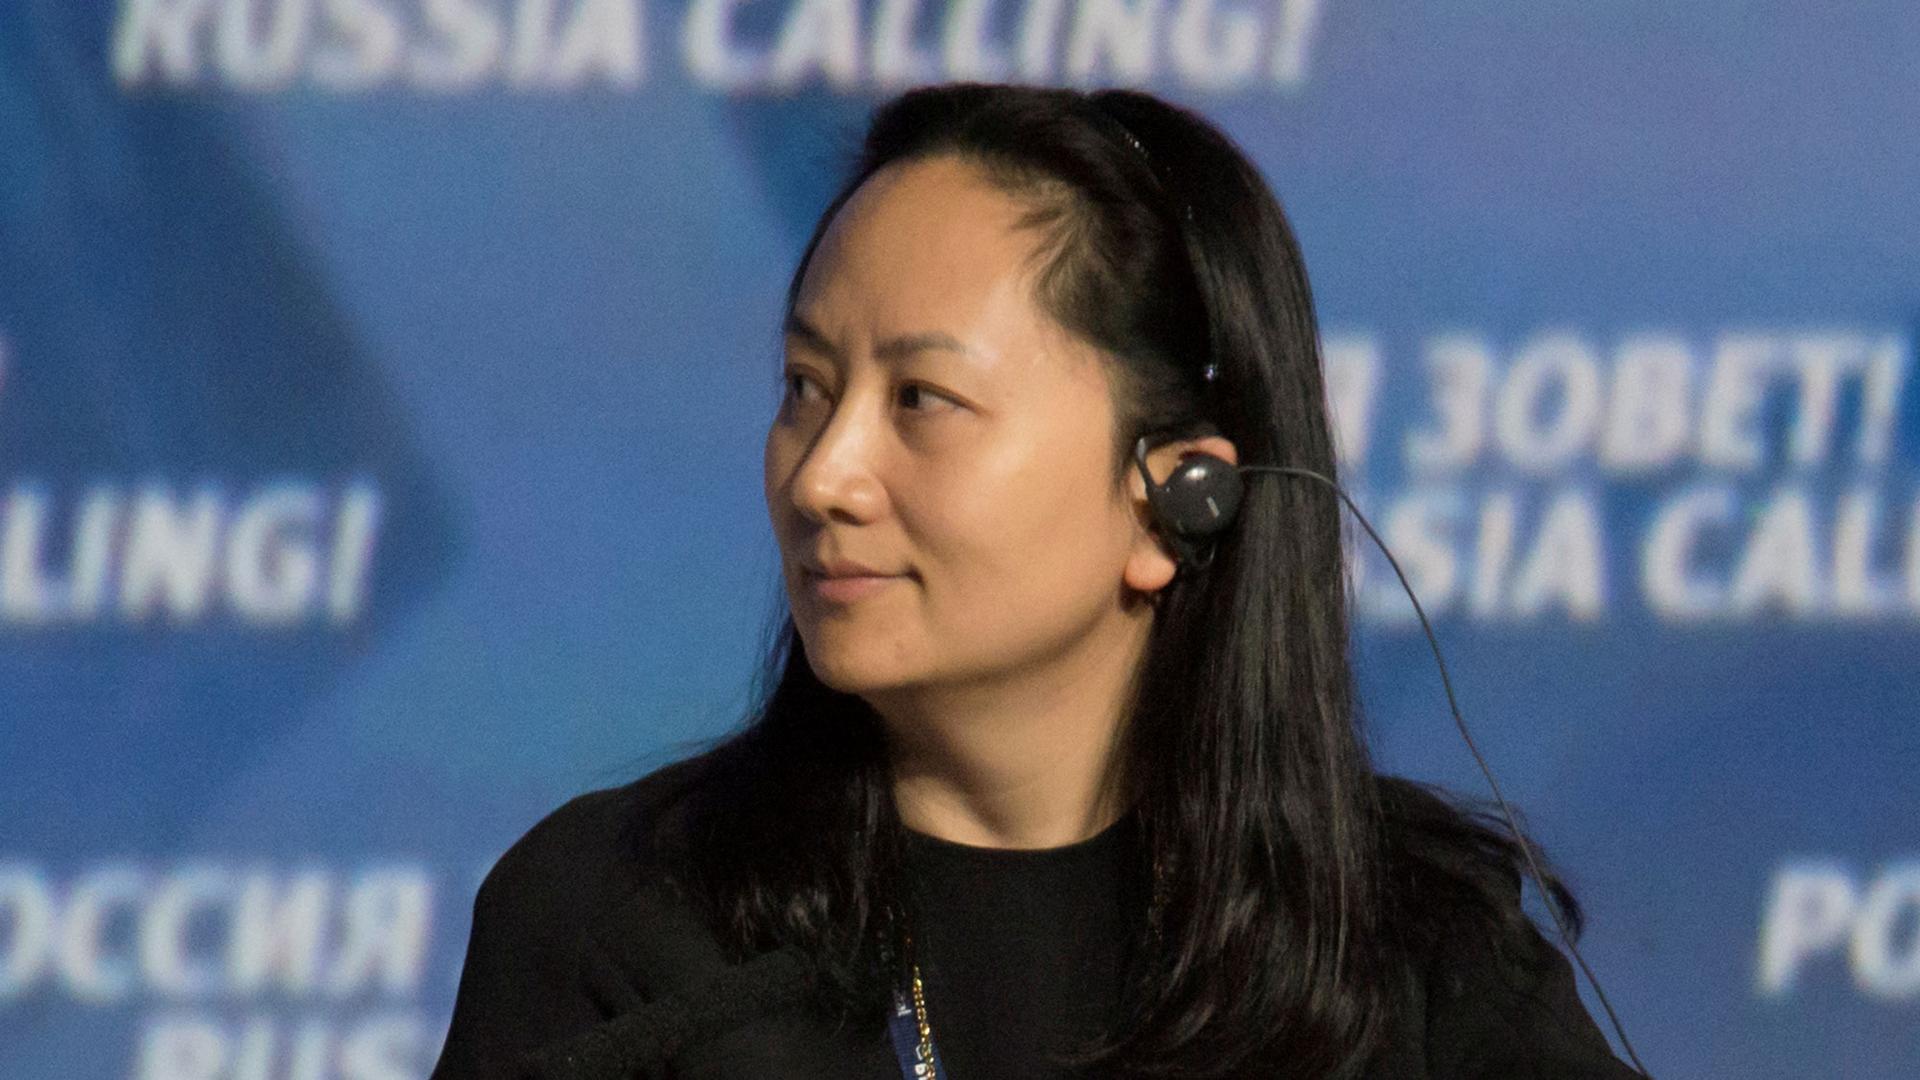 Meng Wanzhou is show in a profile photograph looking to her right and wearing an audio device in her ear.